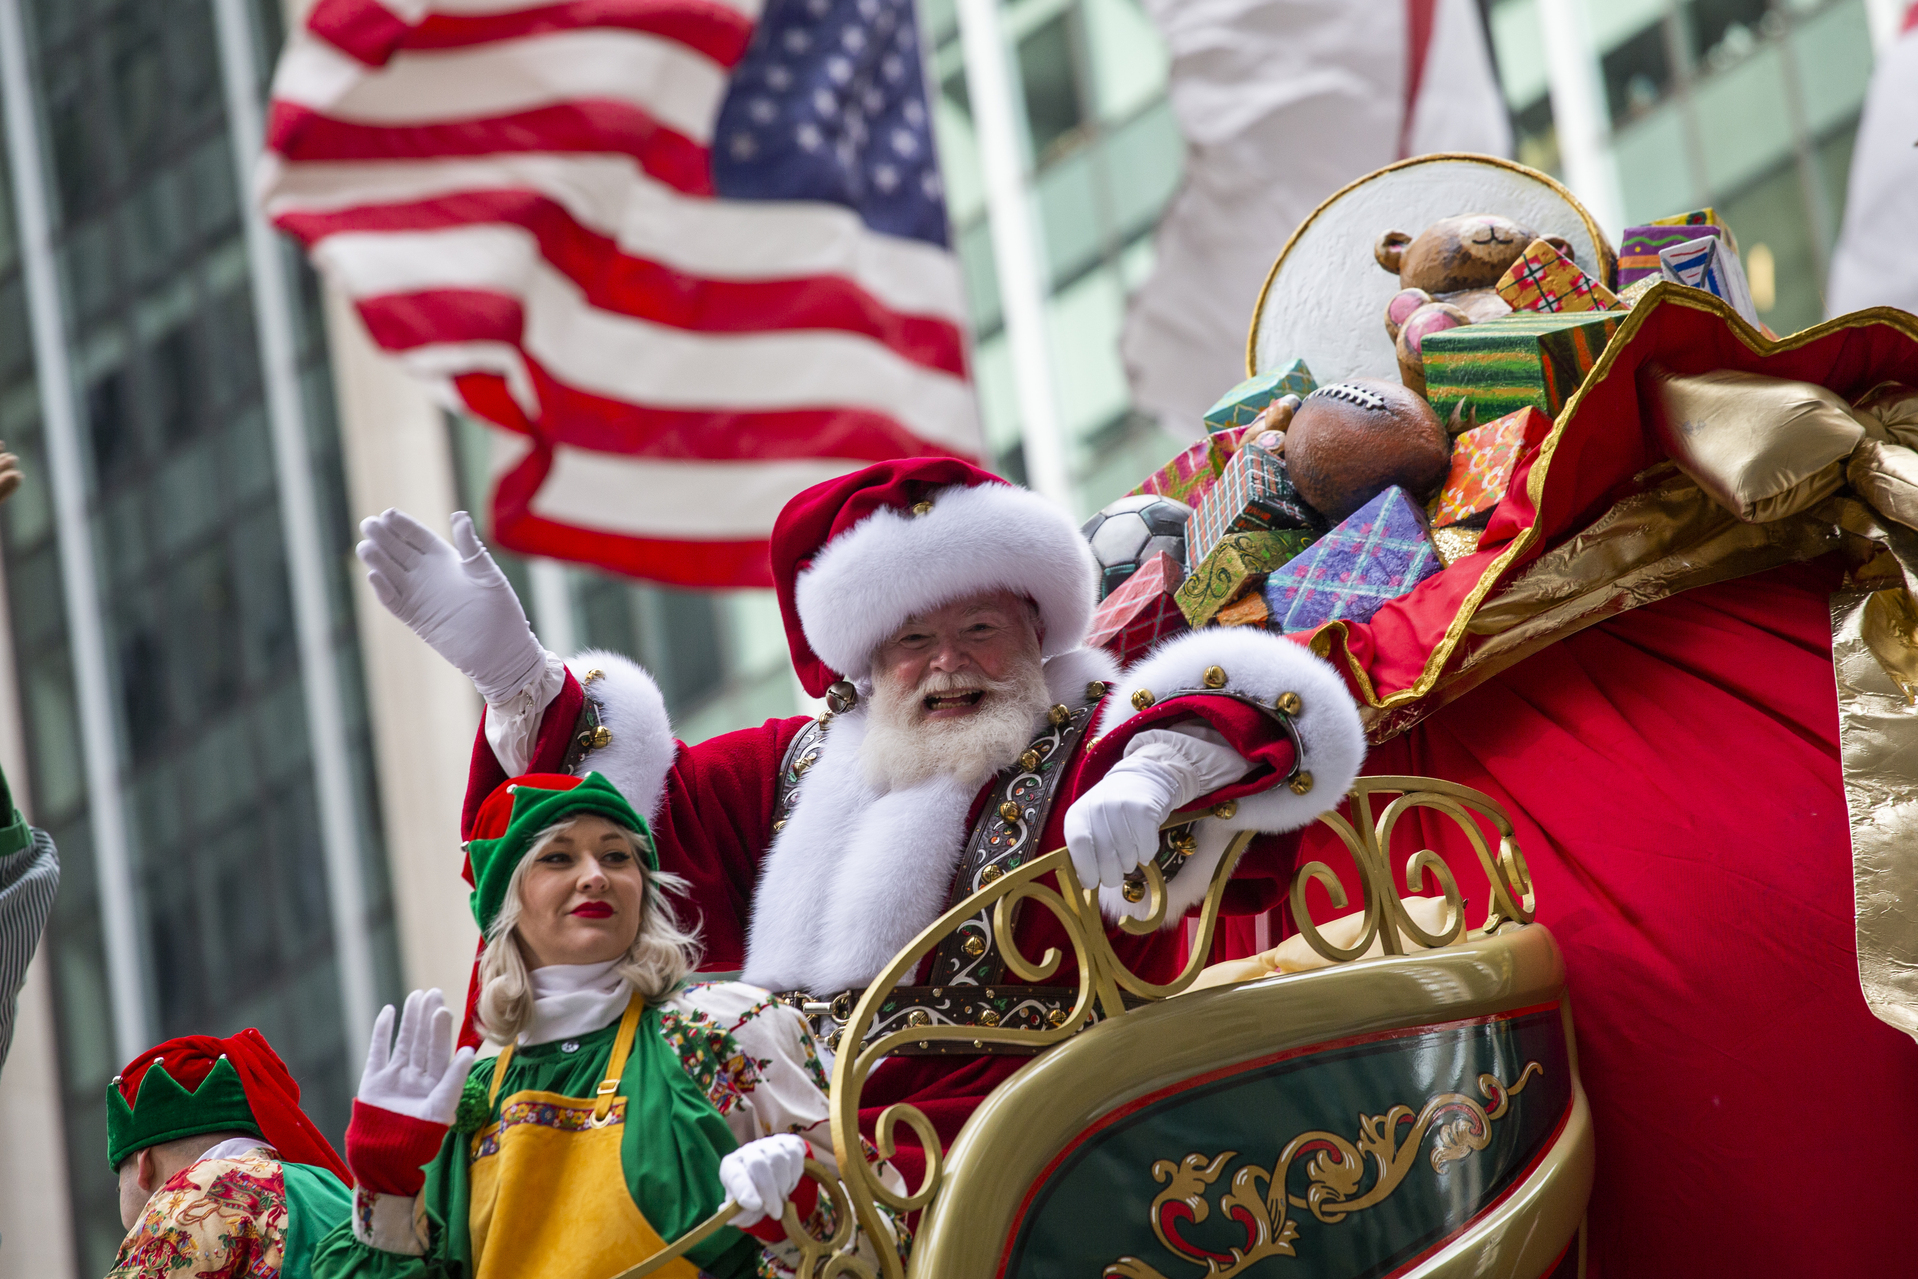 Origins of Christmas: History of Why We Celebrate - Parade